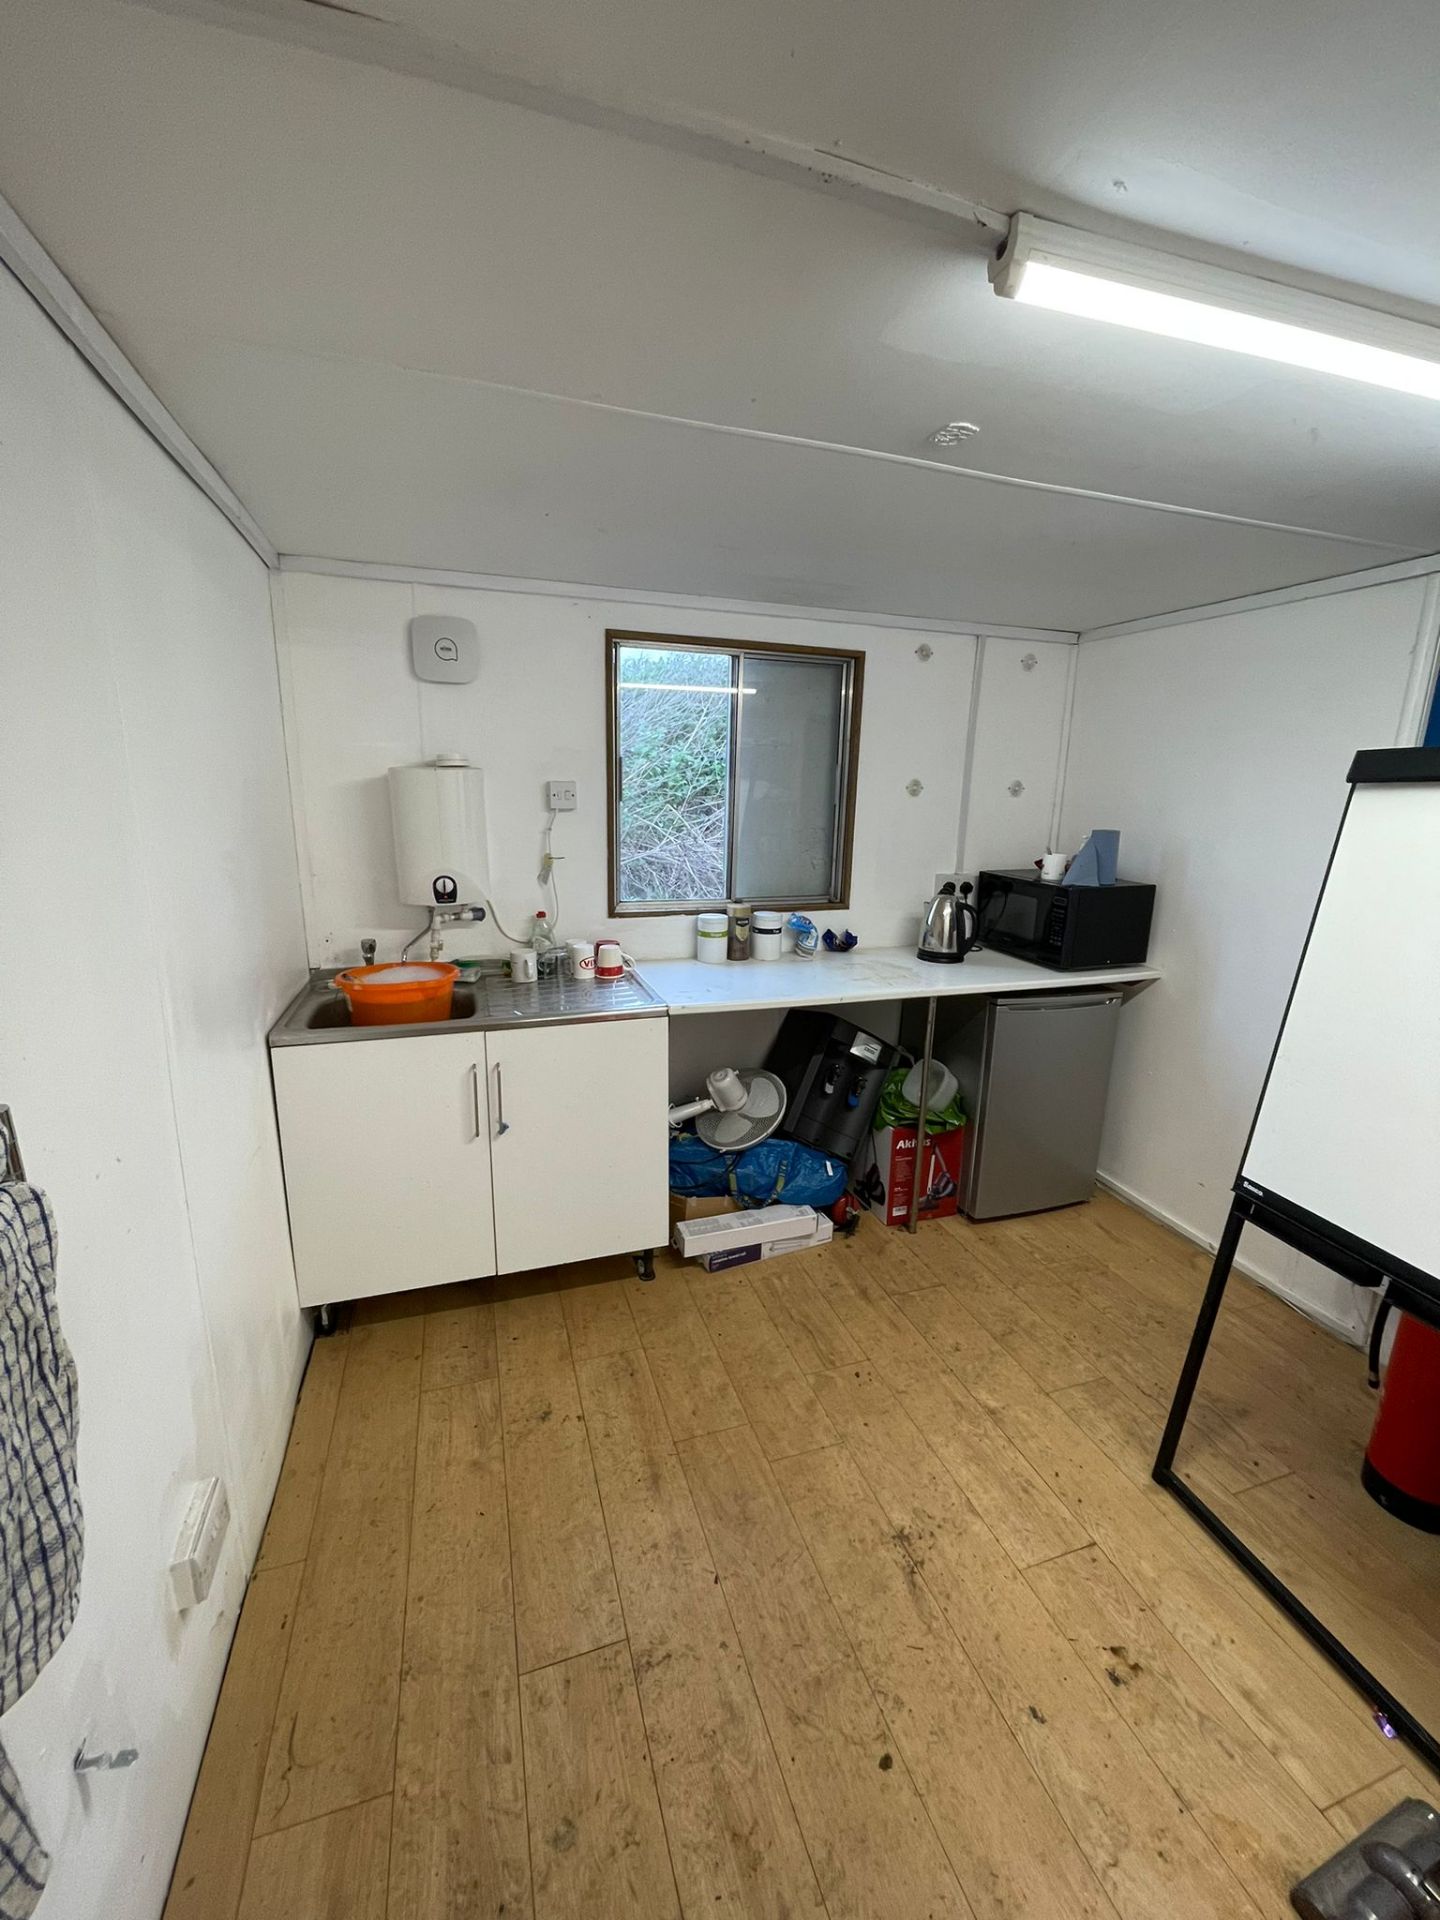 32FT X 10FT ANTI-VANDAL CABIN - OFFICE/ TRAINING ROOM AND SMALL CANTEEN AREA. - Bild 6 aus 8